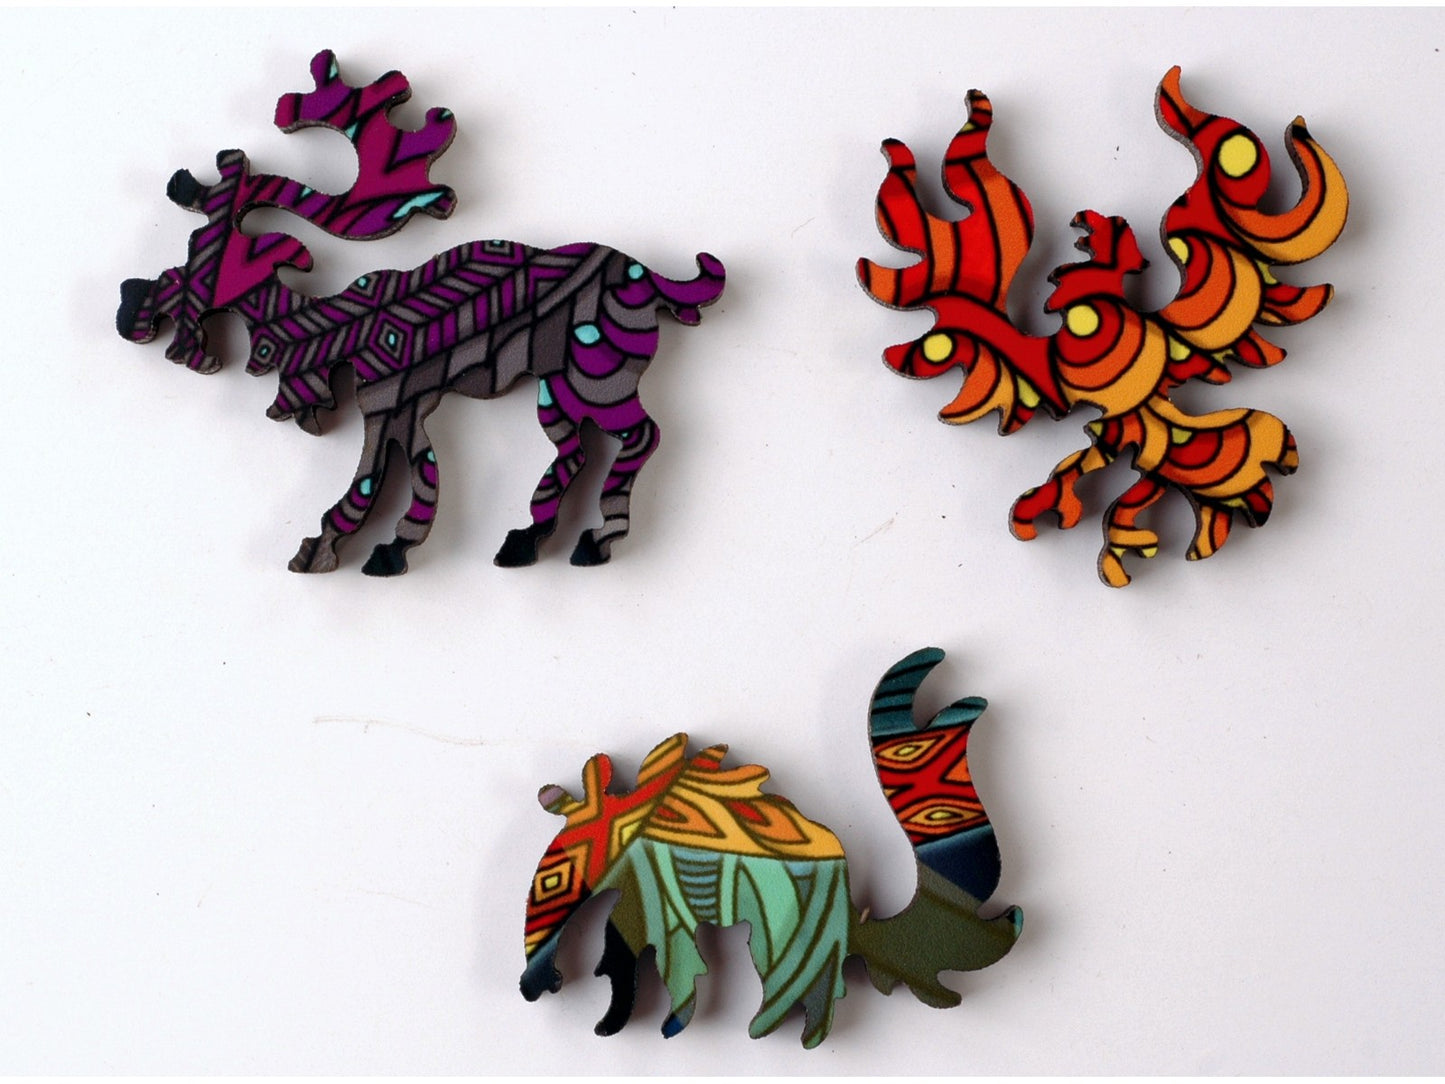 A closeup of pieces in the shape of a reindeer, a phoenix, and an anteater.